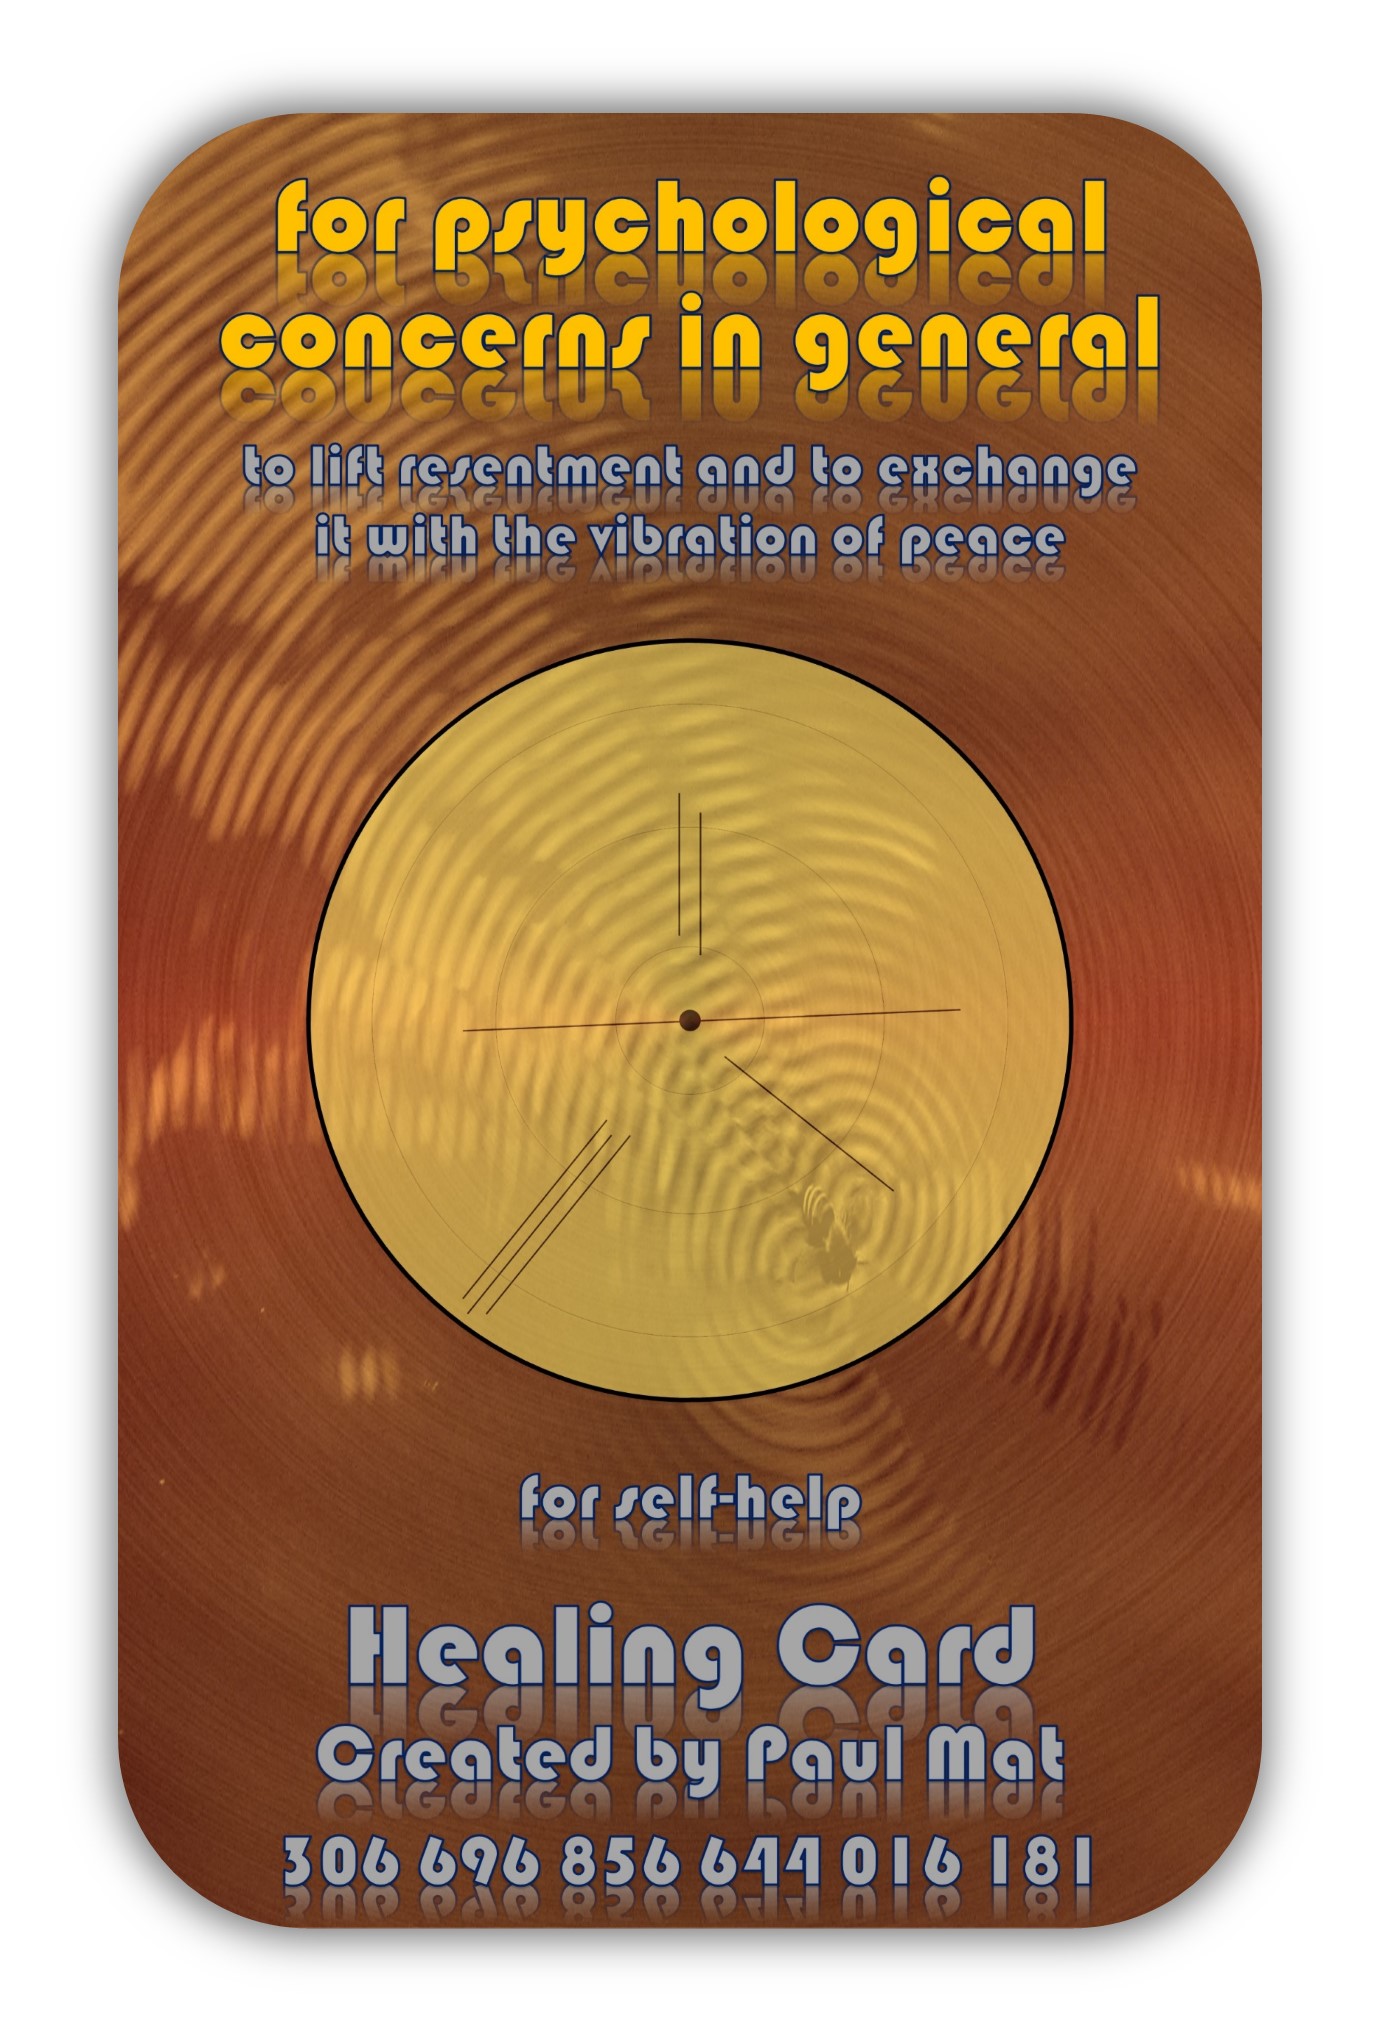 Healing Number Card with radionics barcode #181